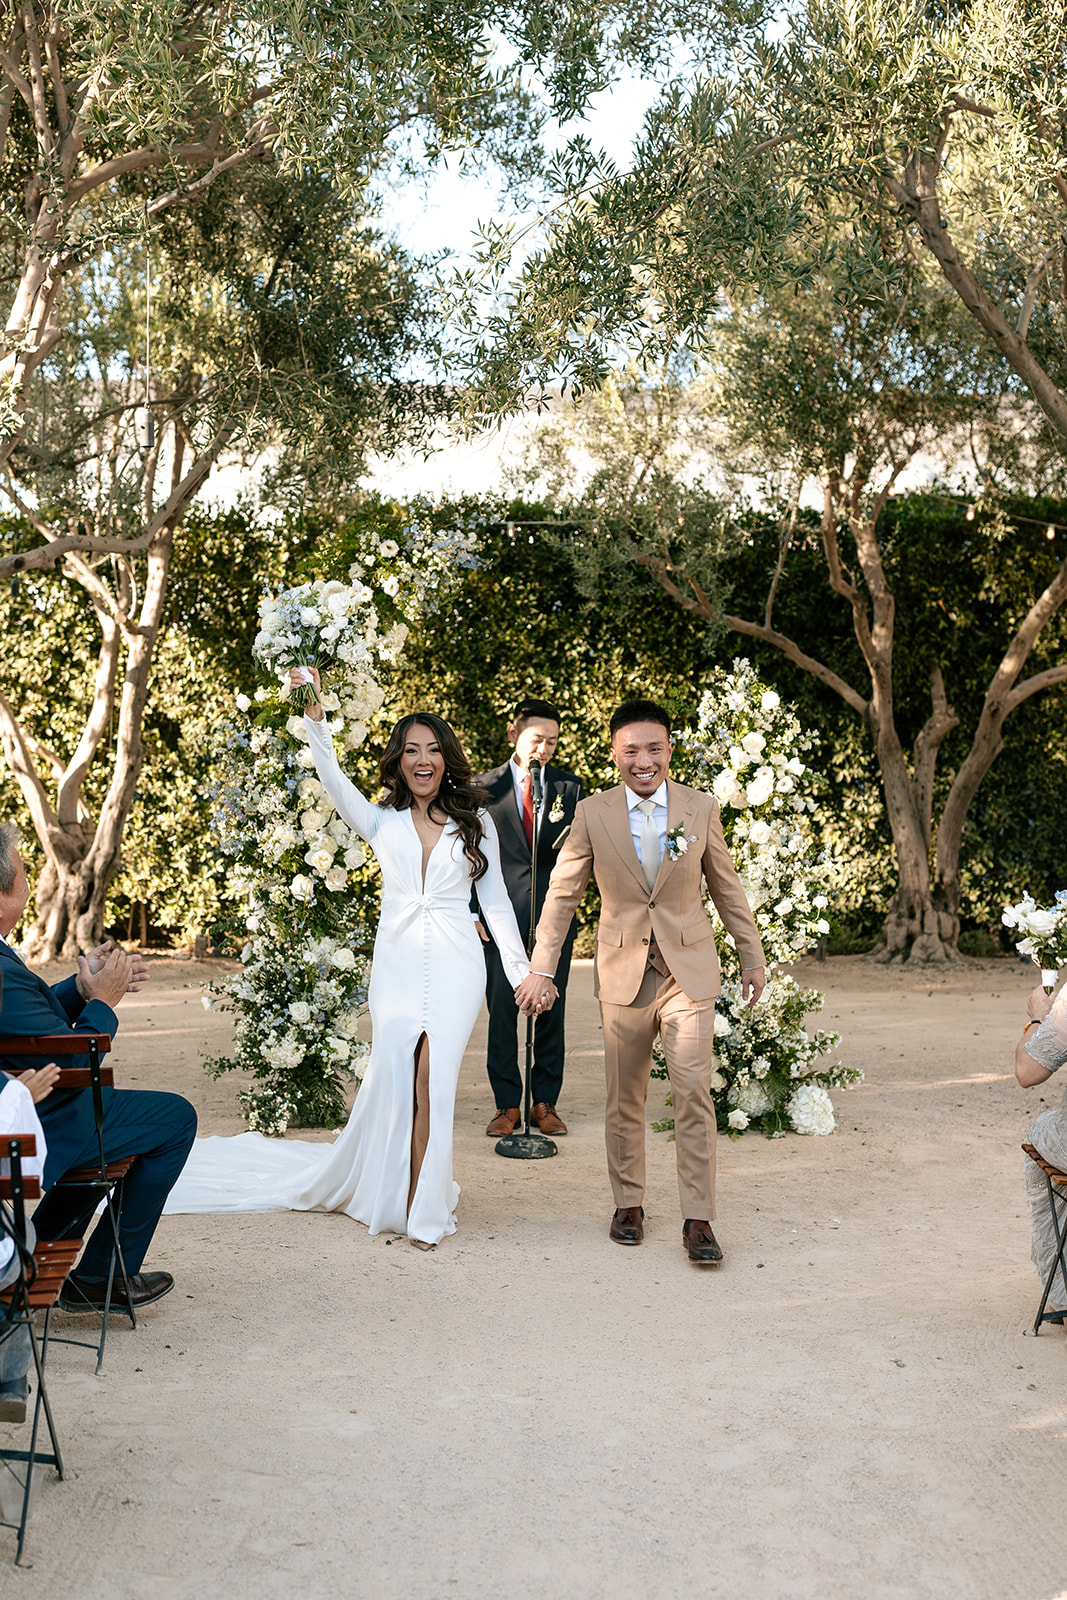 grand gimeno wedding orange county california bride and groom poses bride and groom photoshoot pictures couples poses